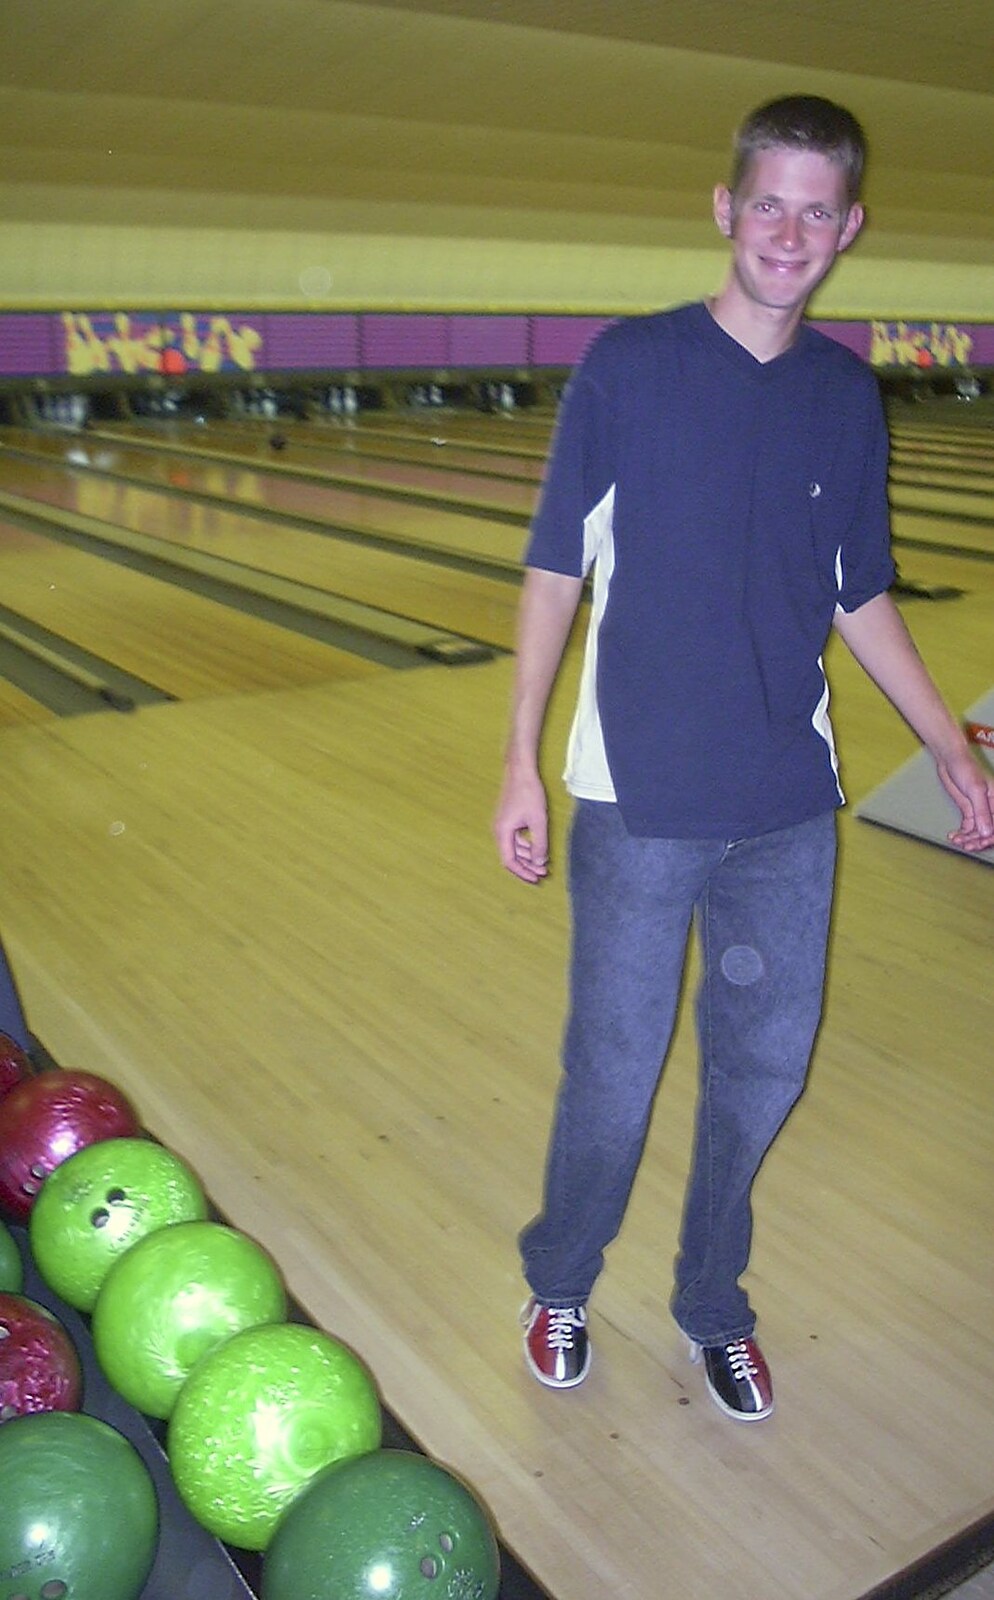 The Boy Phil, after a bowl from Ten Pin Bowling, Norwich, Norfolk - 13th September 2003